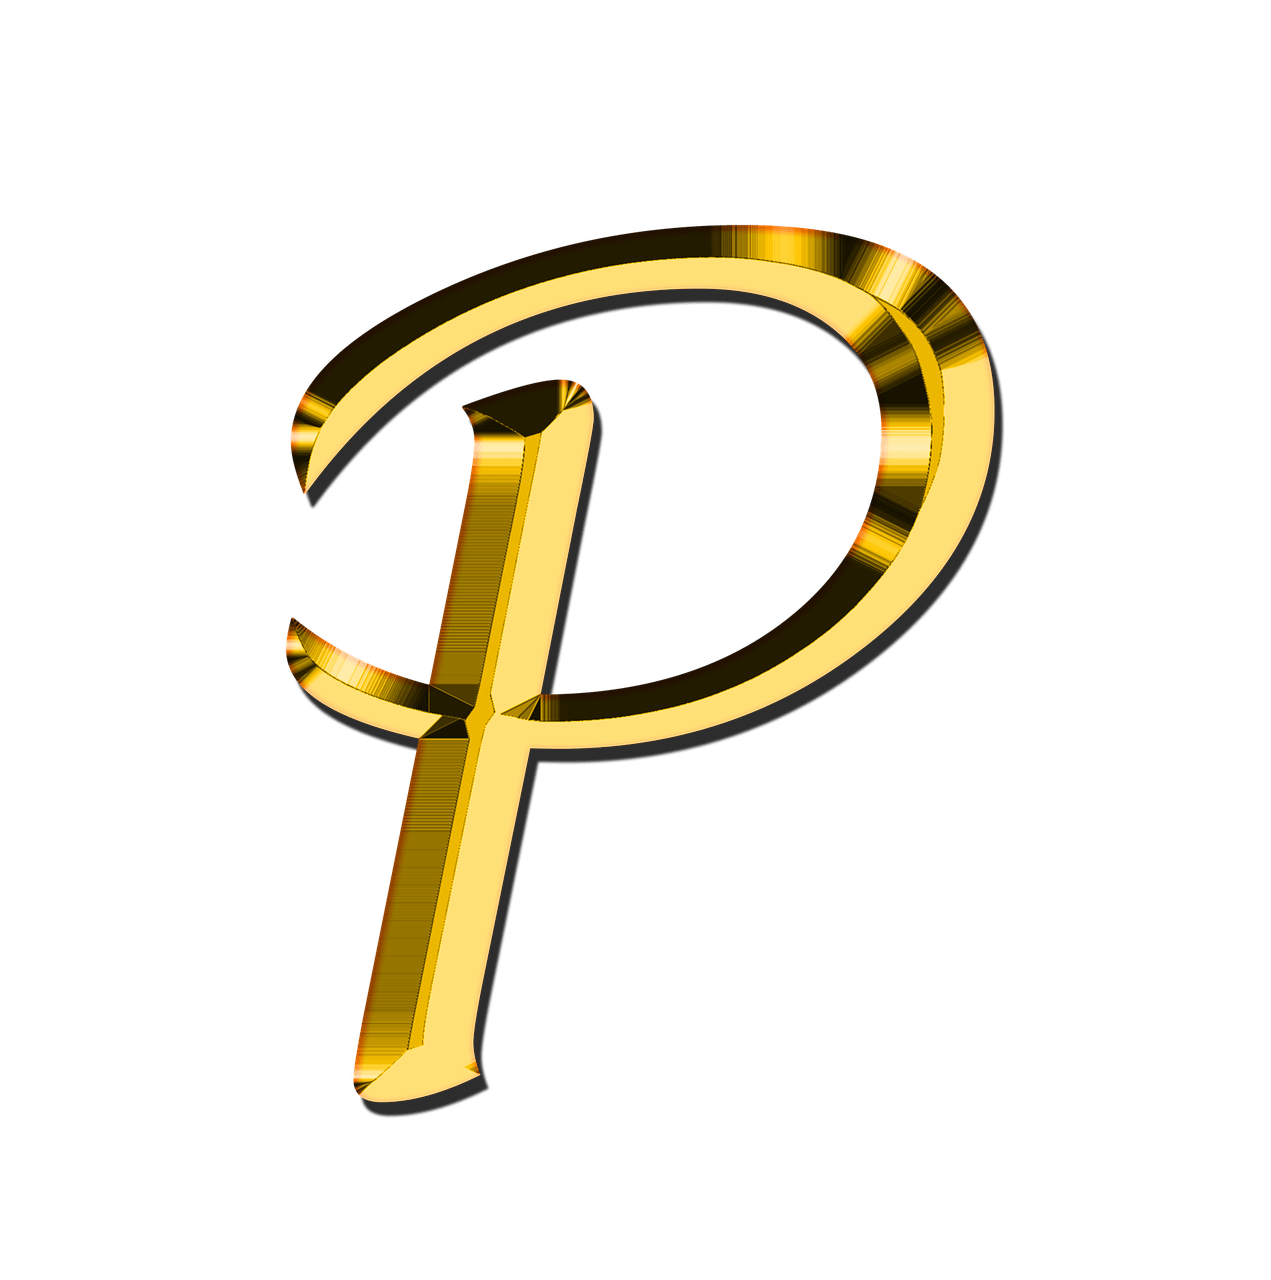 P Letter PNG Background Image